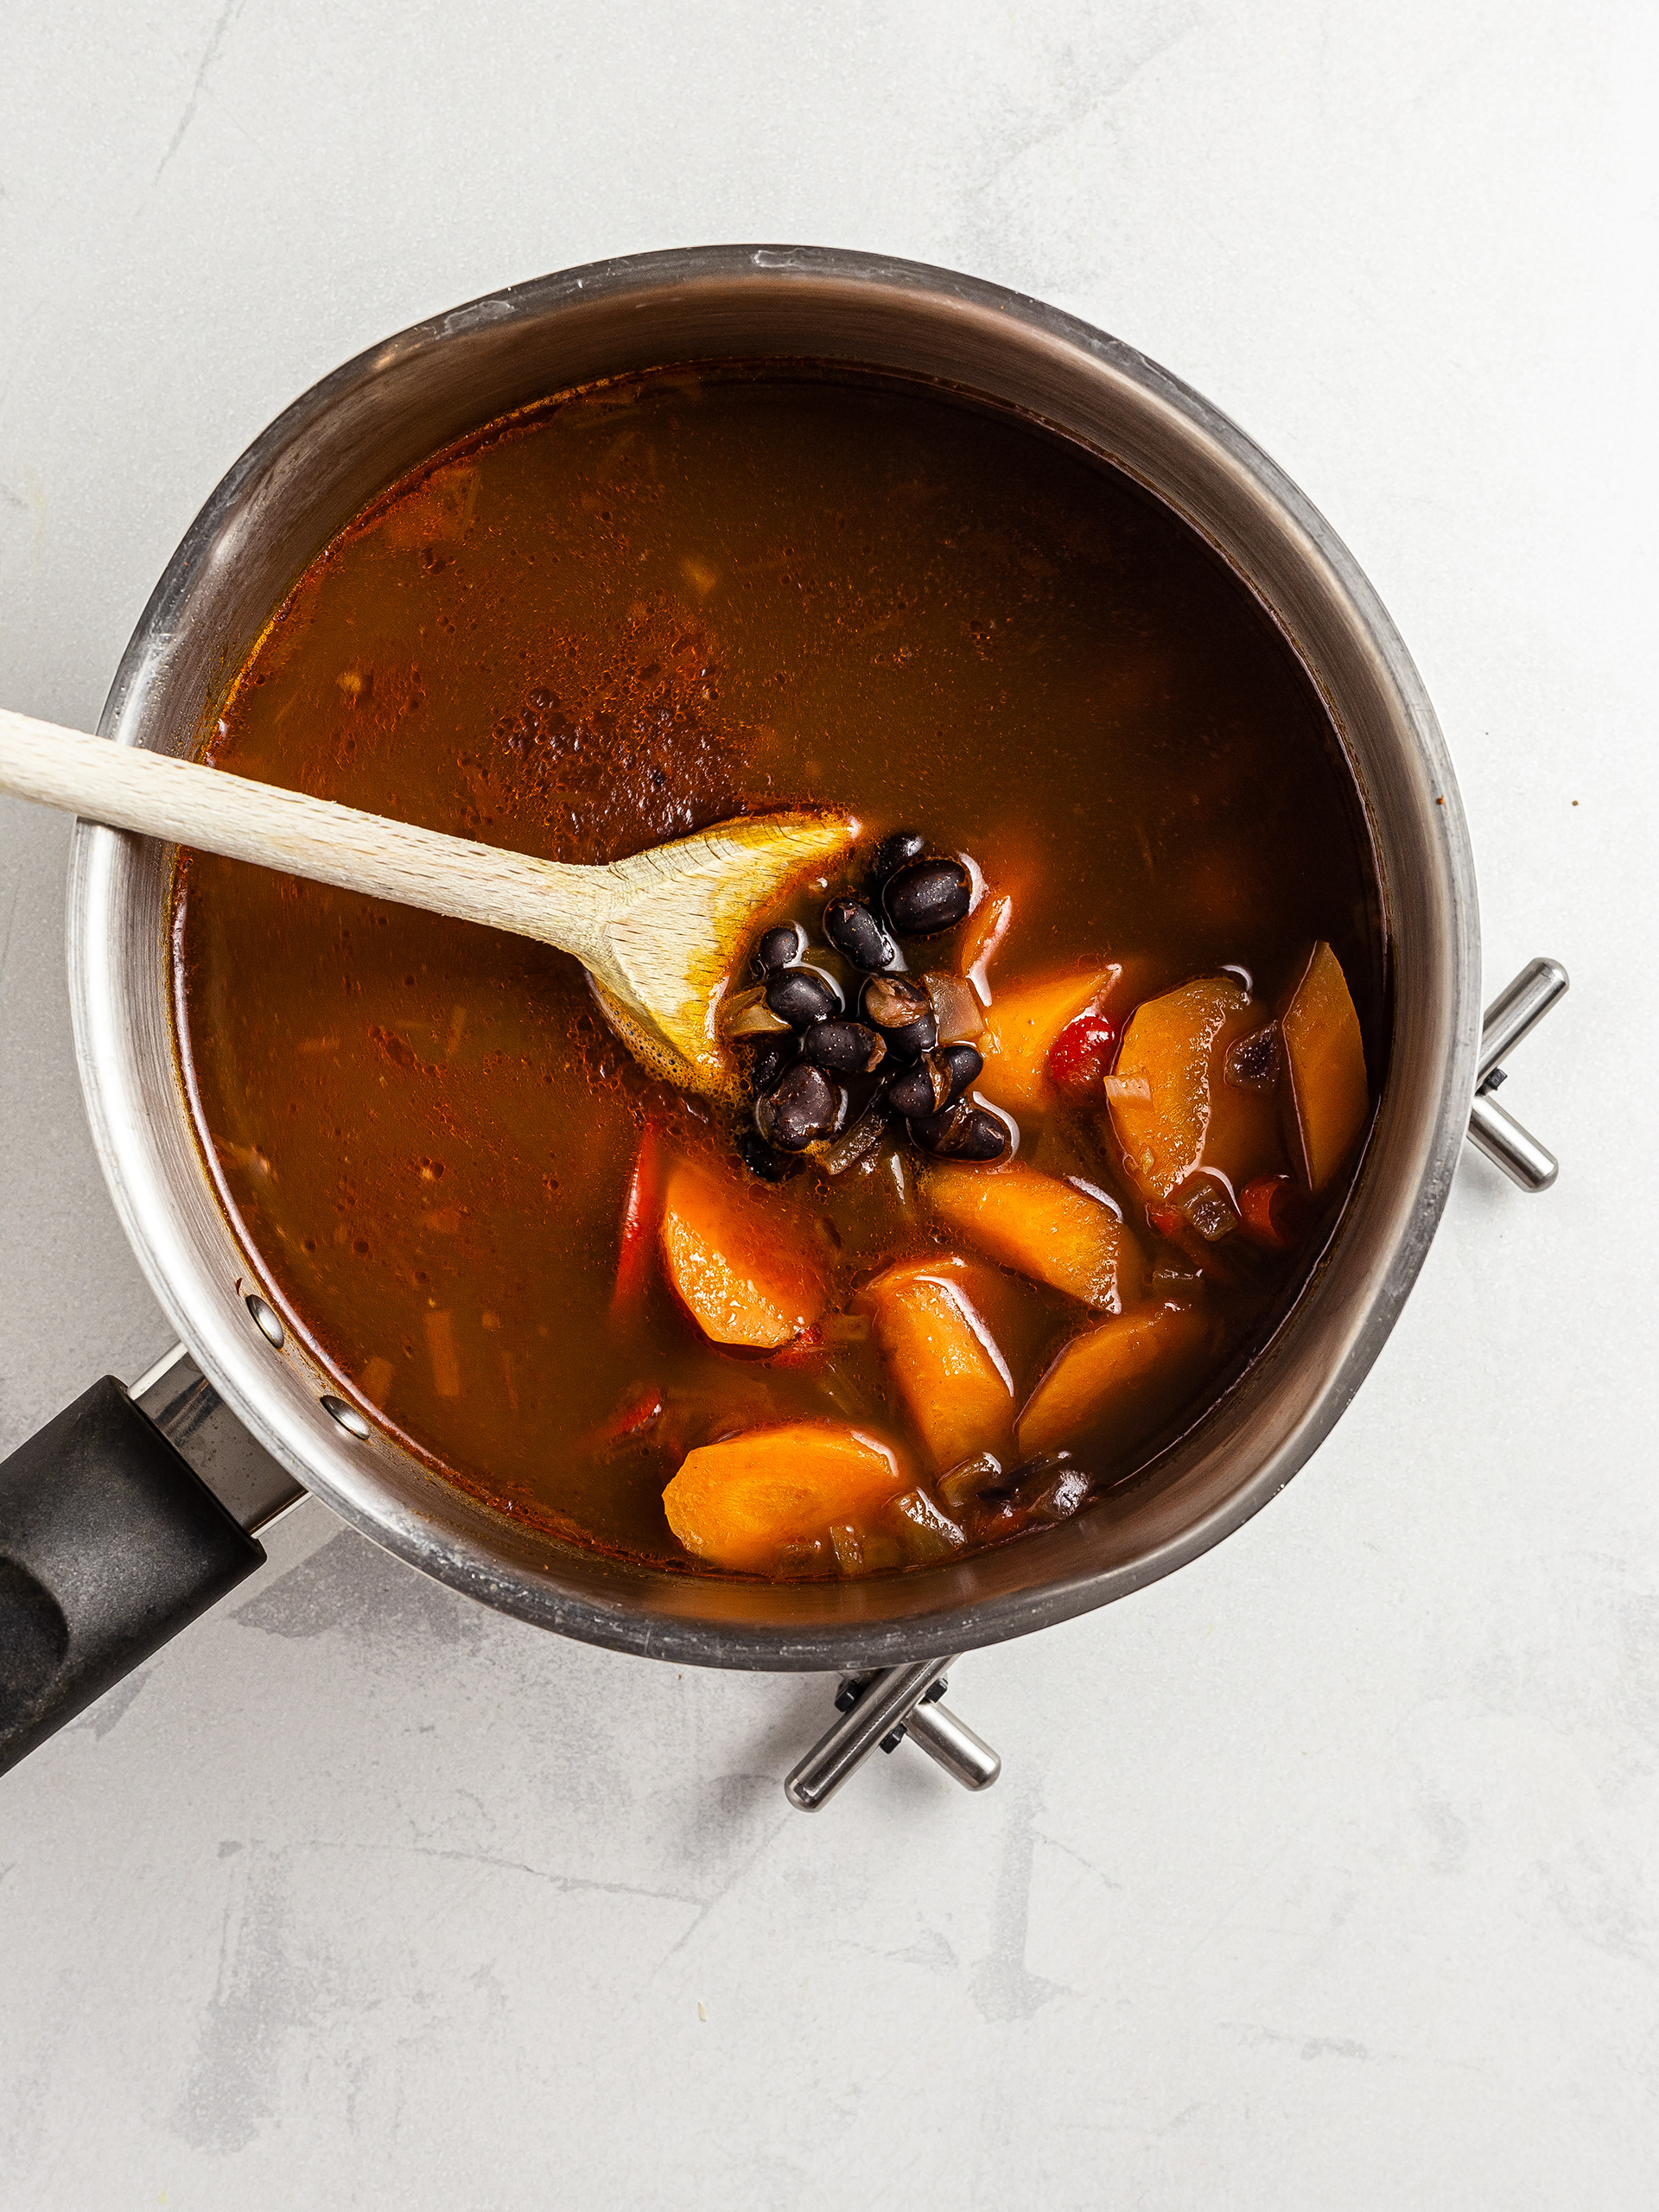 Black beans and carrot stew in a pot